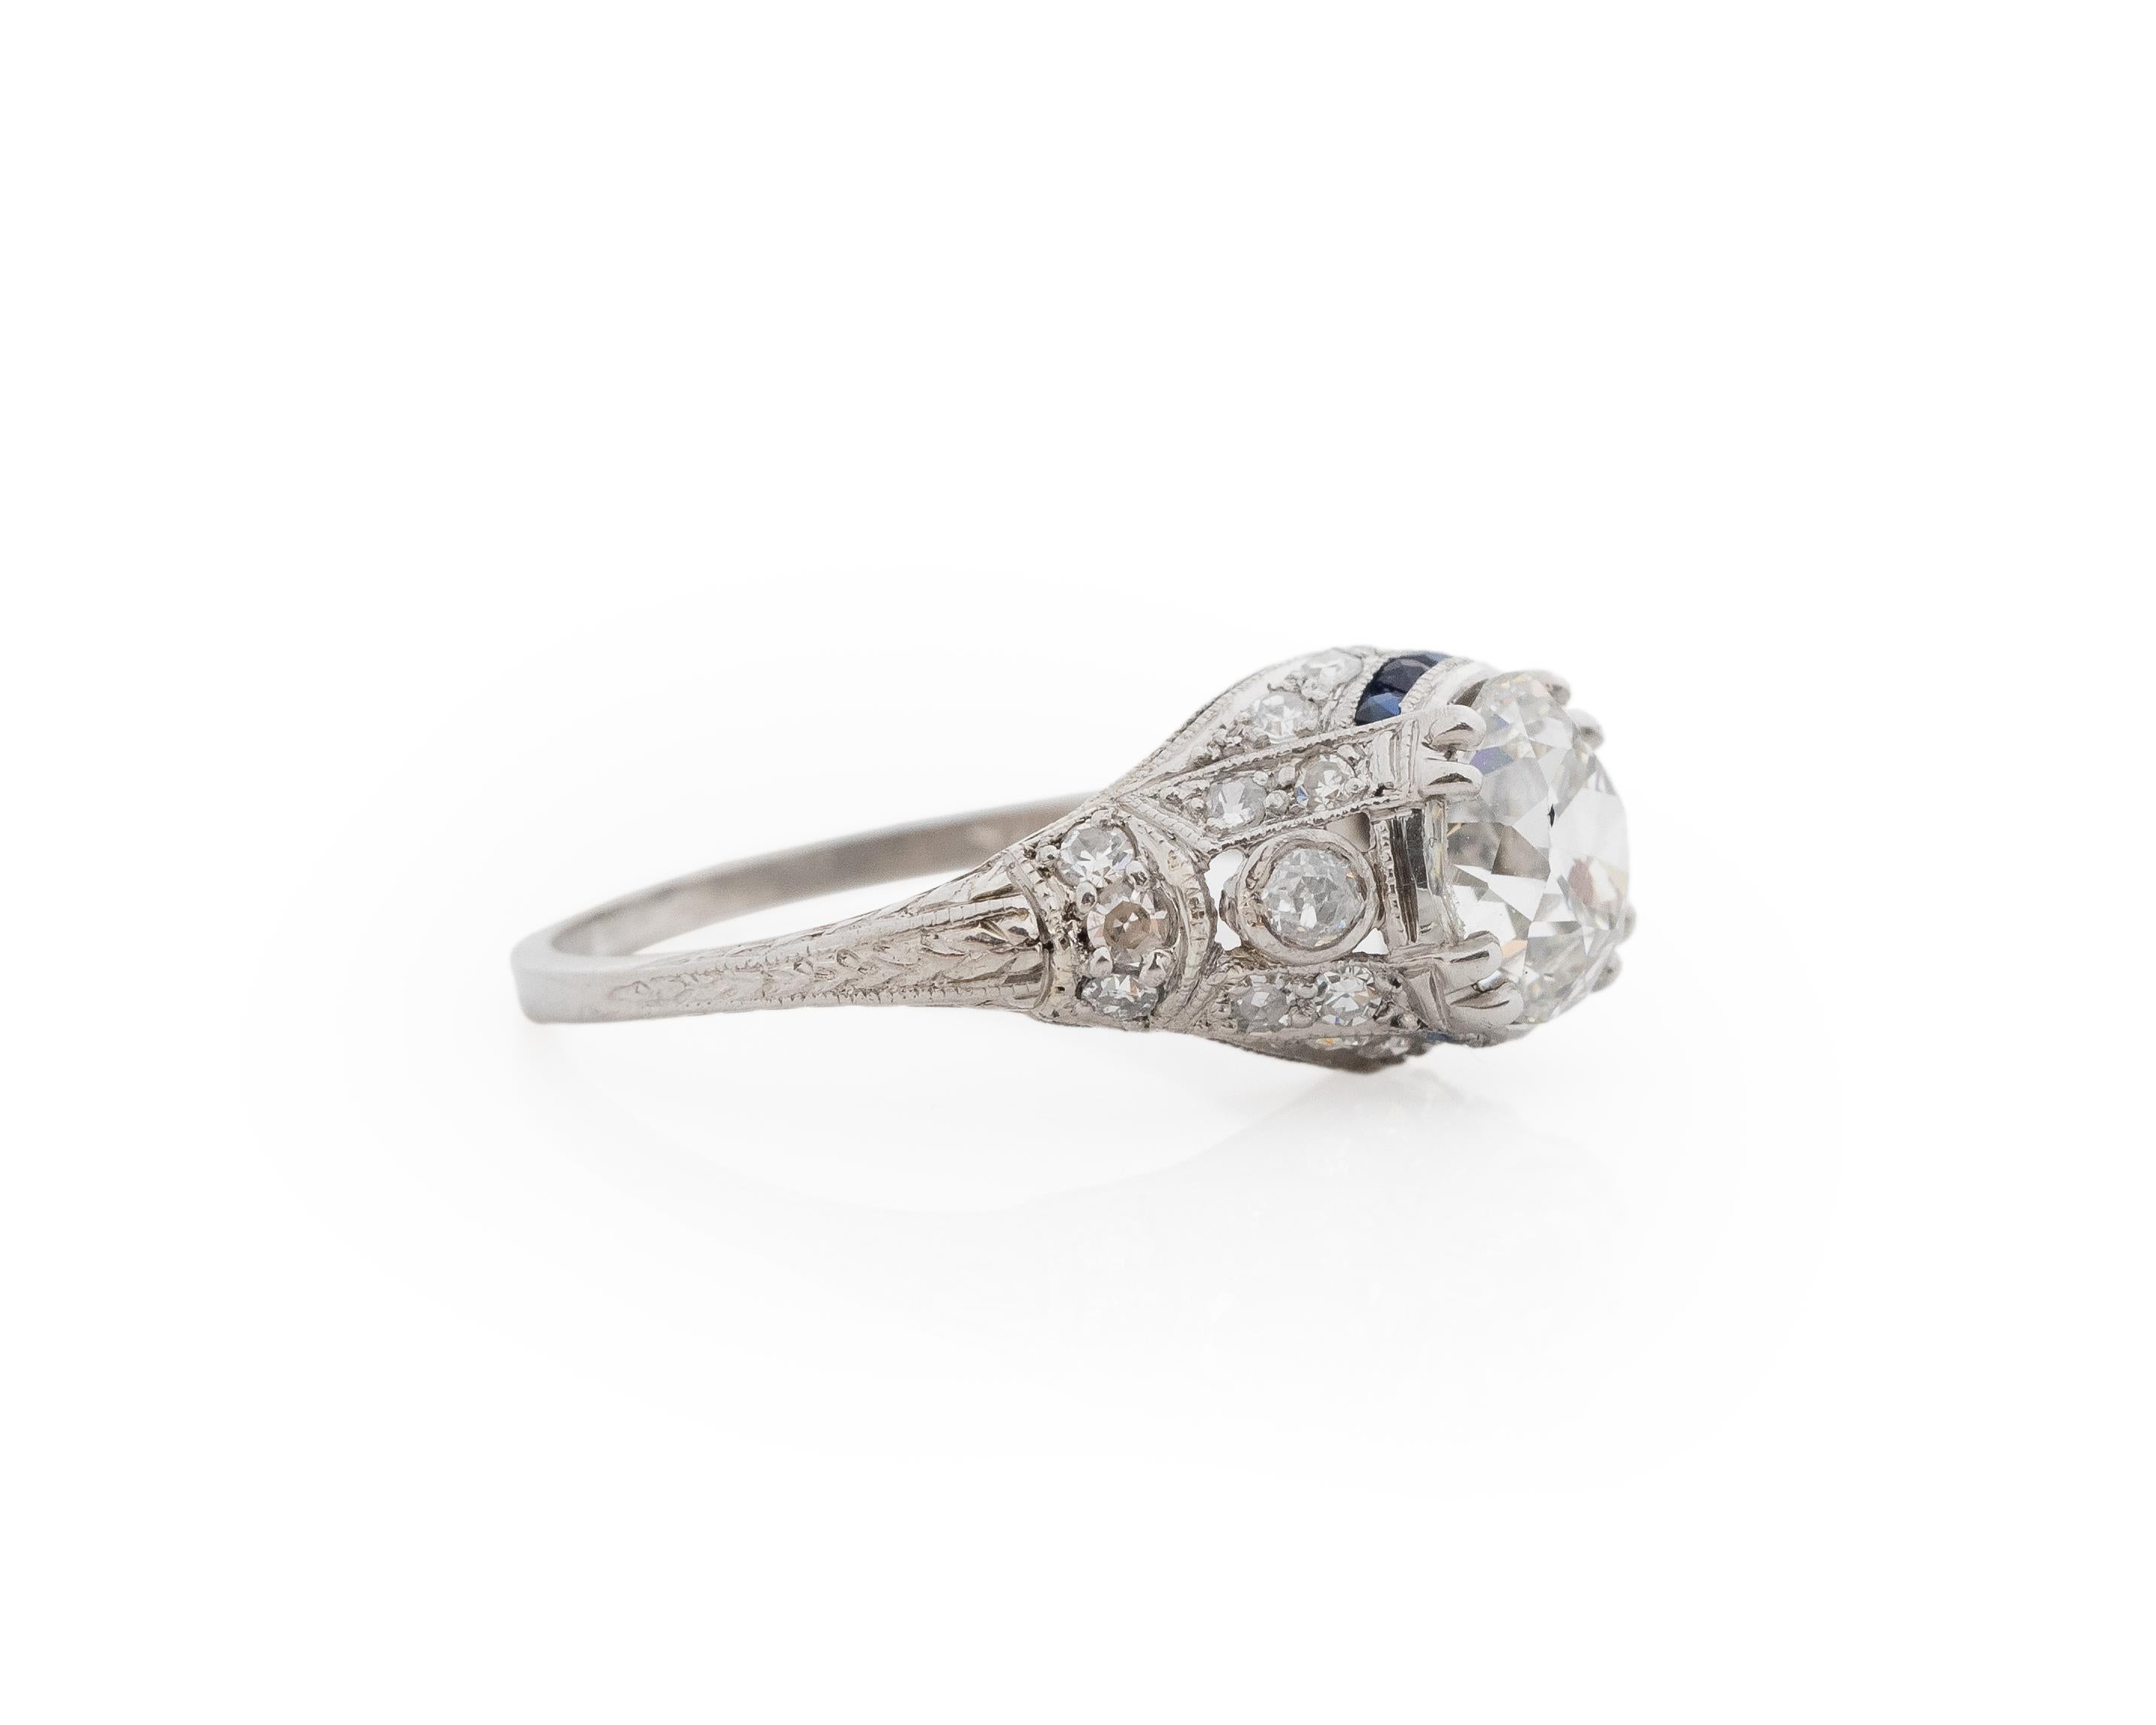 Year: 1920s

Item Details:
Ring Size: 6.25
Metal Type: Platinum [Hallmarked, and Tested]
Weight: 3.0 grams

Center Diamond Details:

GIA Report#: 2231052748
Weight: 1.40ct total weight
Cut: Old European brilliant
Color: I
Clarity: VS2
Type: